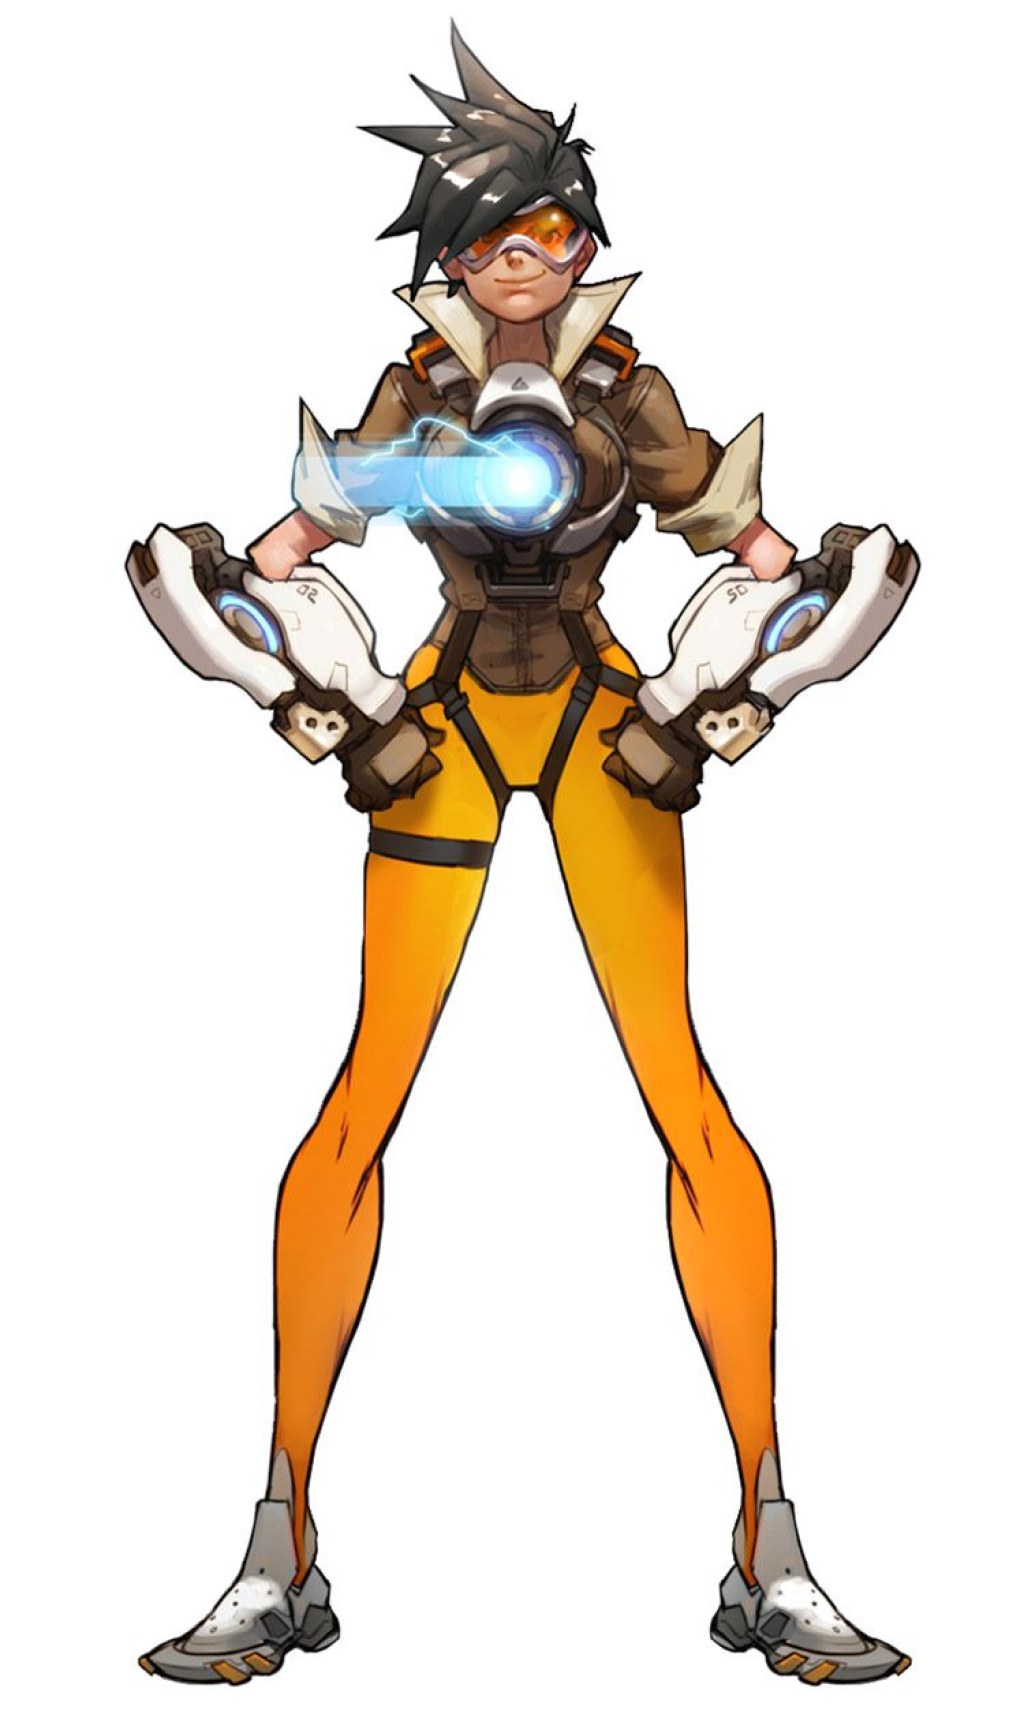 tracer concept art - Tracer Concept from Overwatch  Concept art, Game concept art